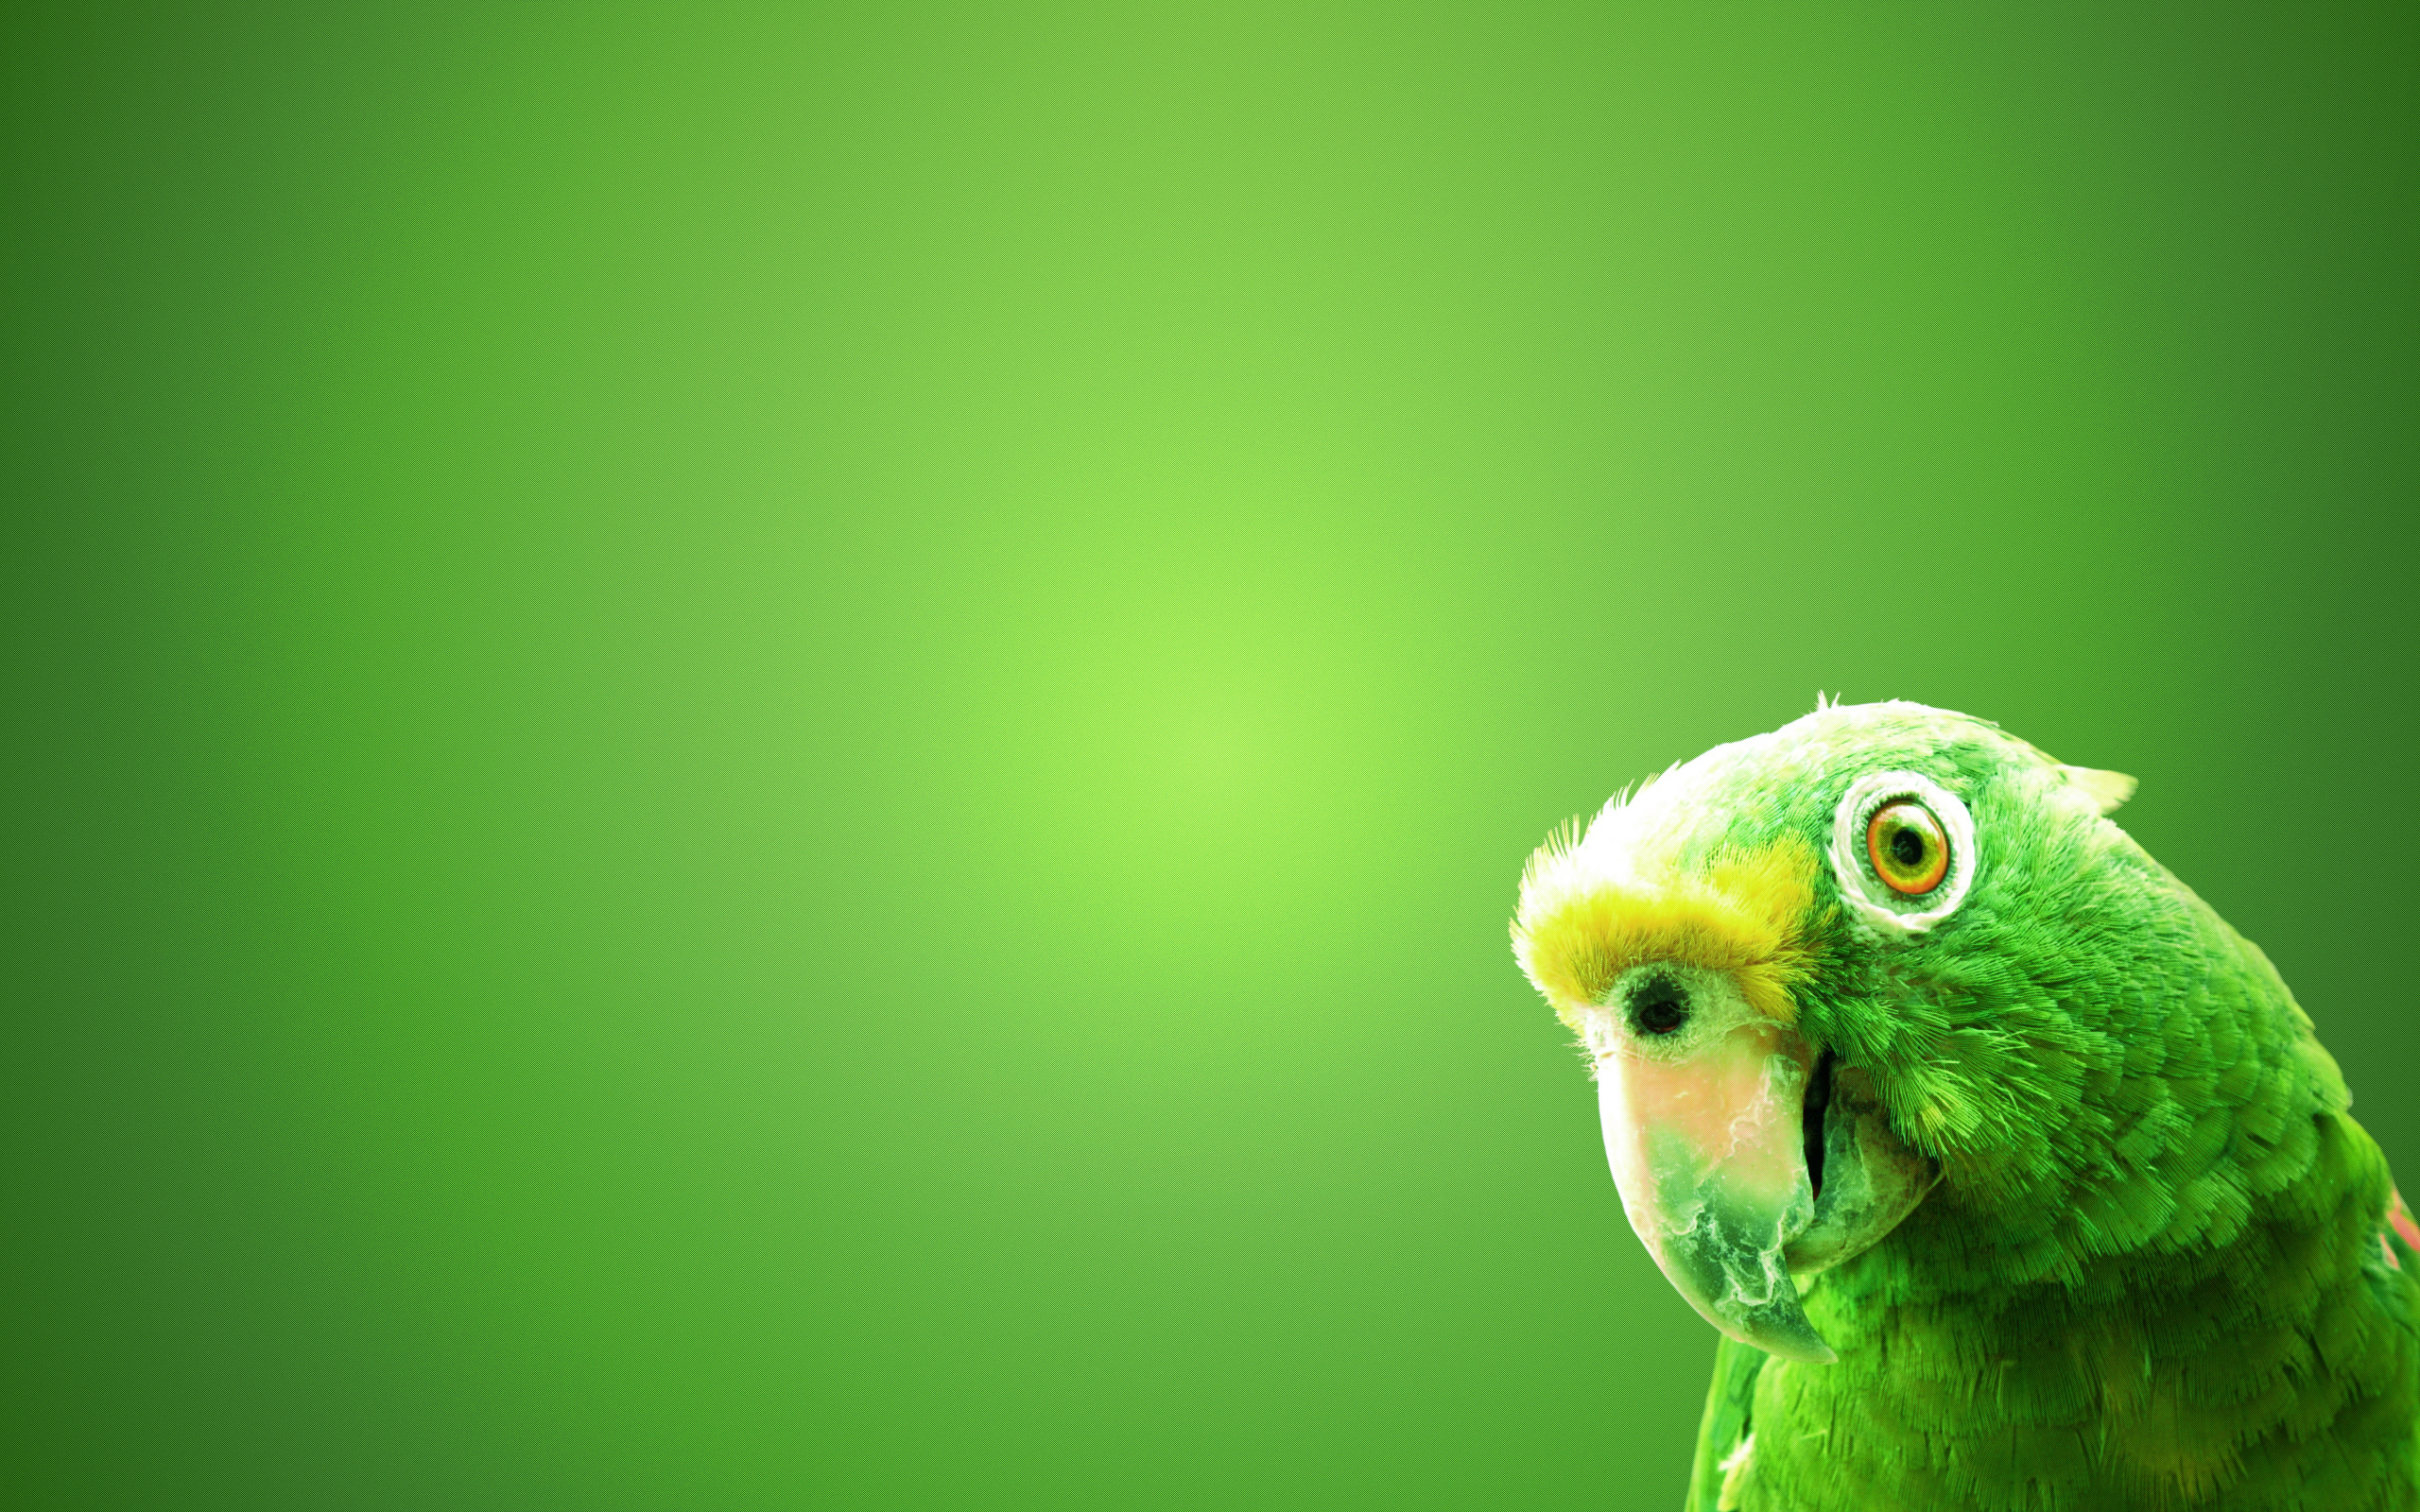 Wallpaper Of Animals A Green Parrot On The Screen Click To